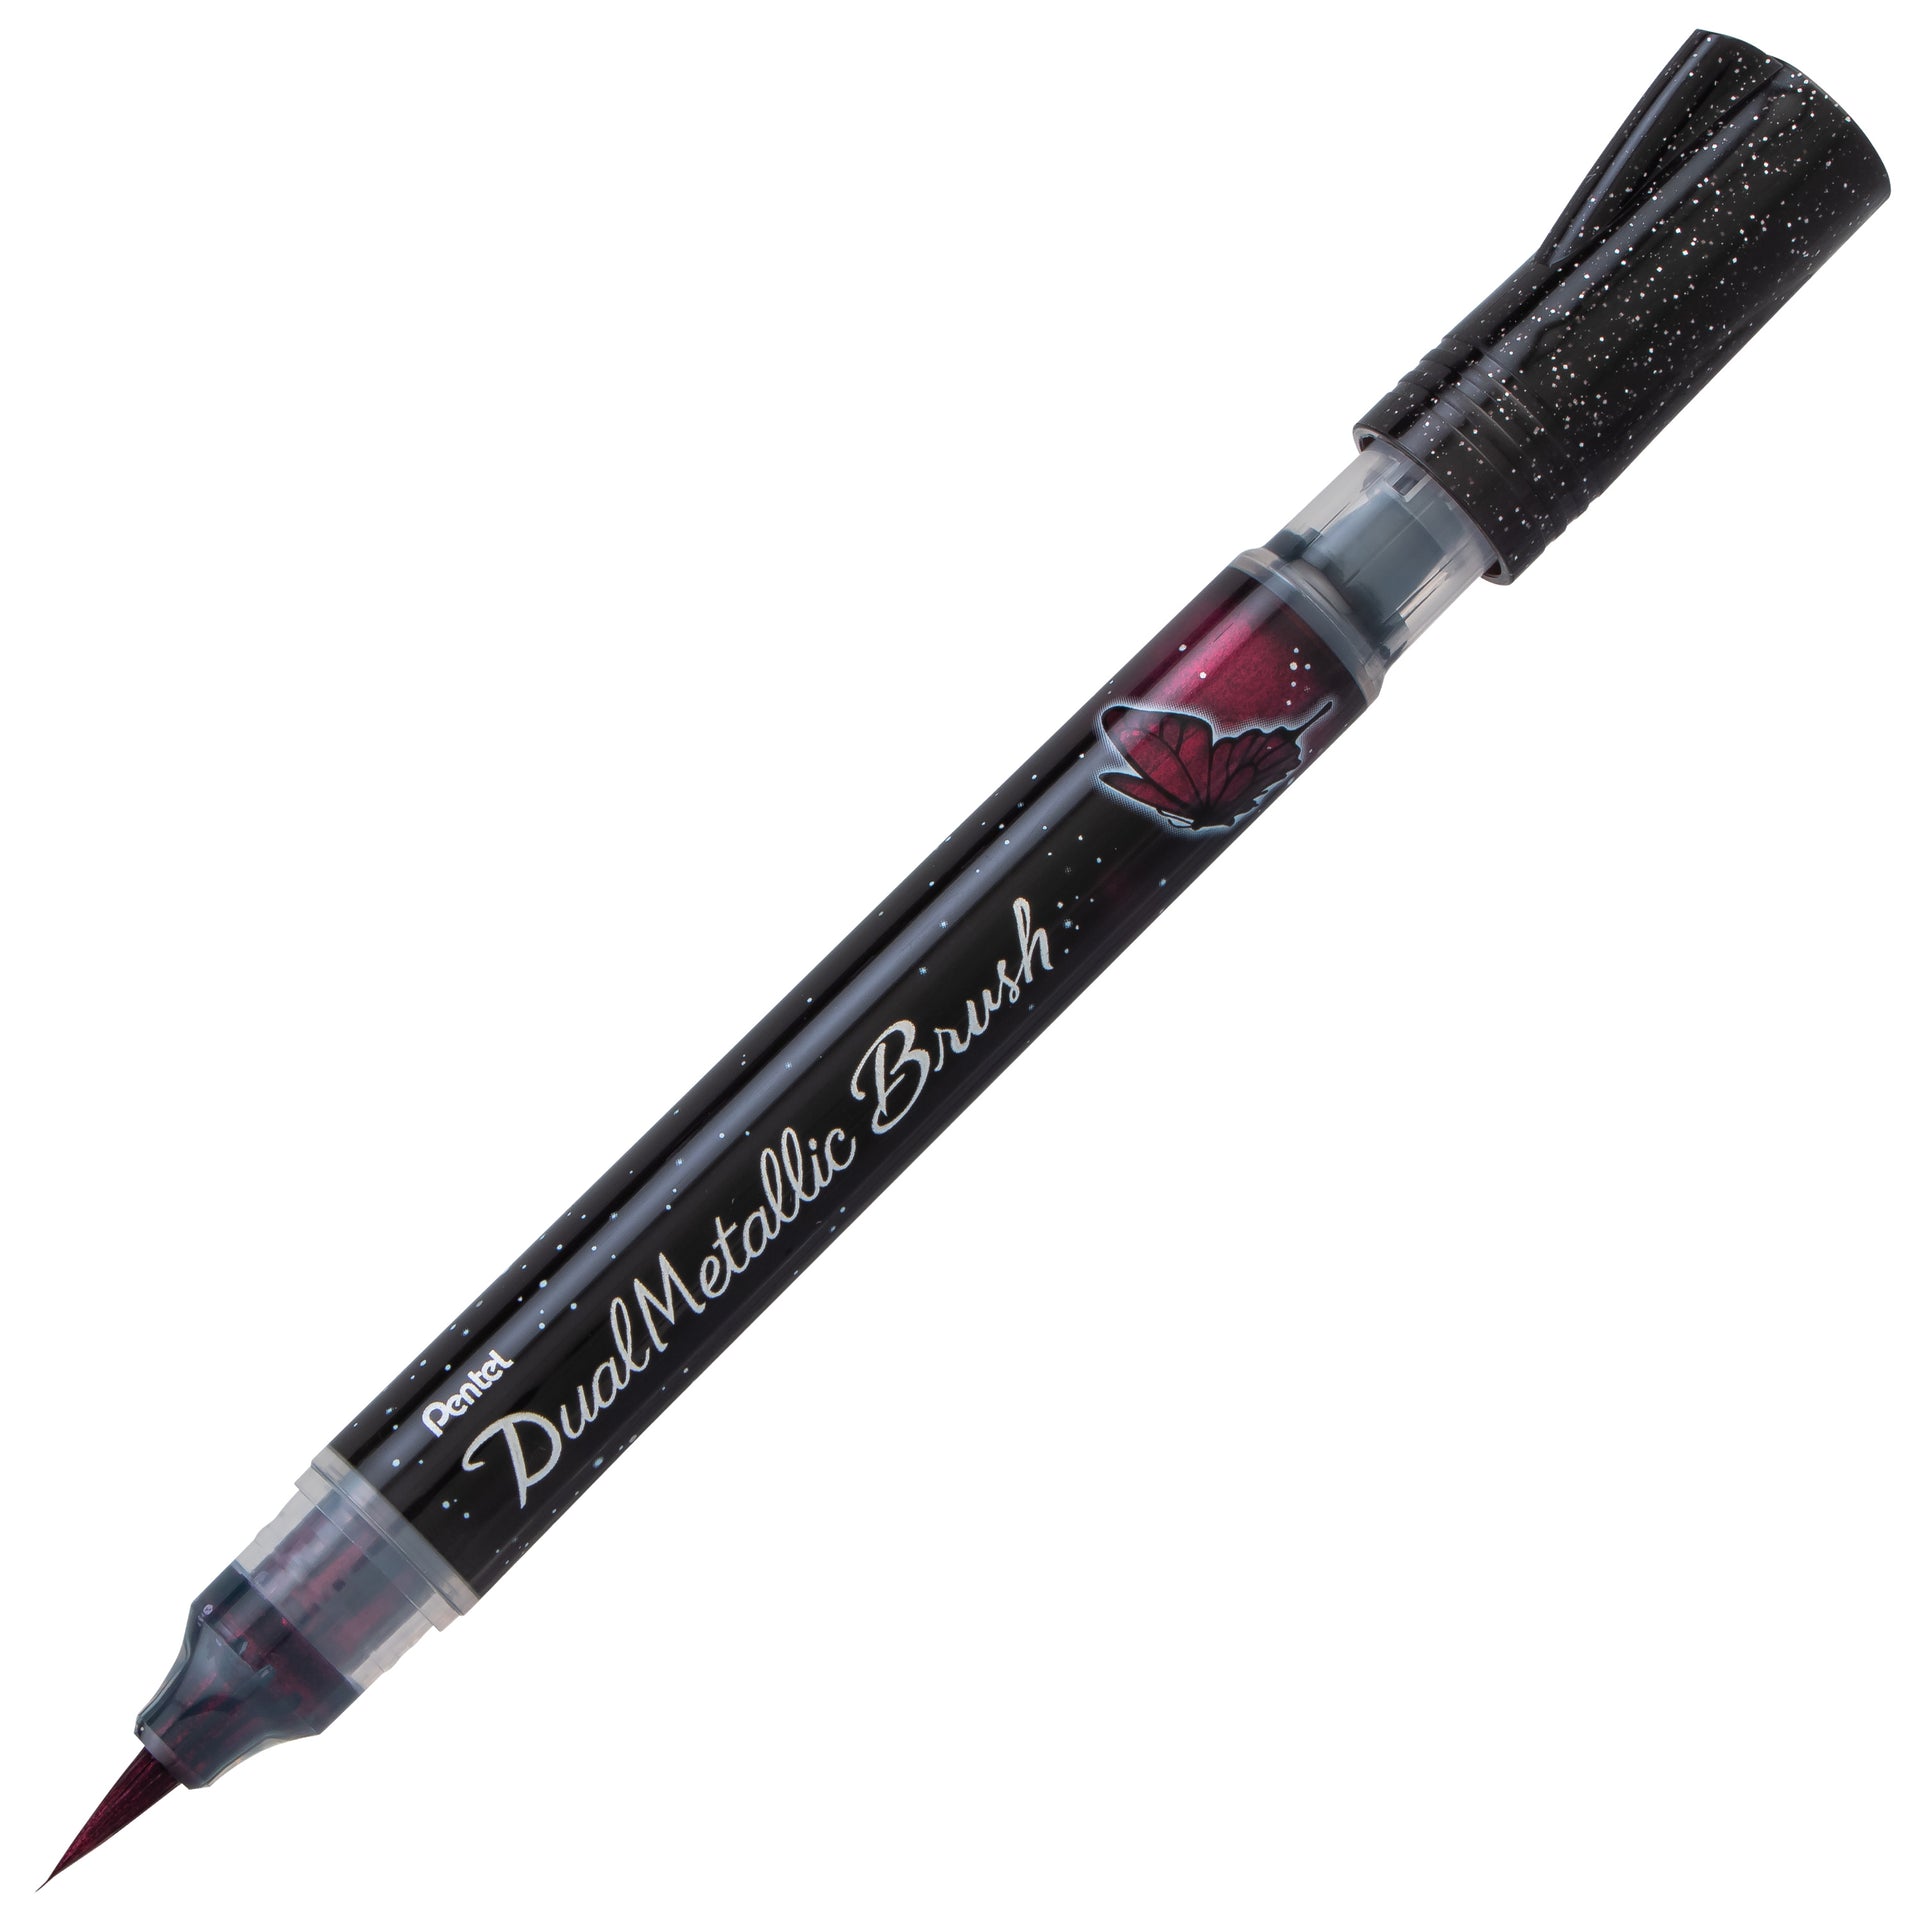  Pentel XFP9L Brush Pen, Pentel Brush, Red Ink, Medium Point,  1.6 x 9.1 x 0.6 inches (40 x 230 x 15 mm) : Office Products